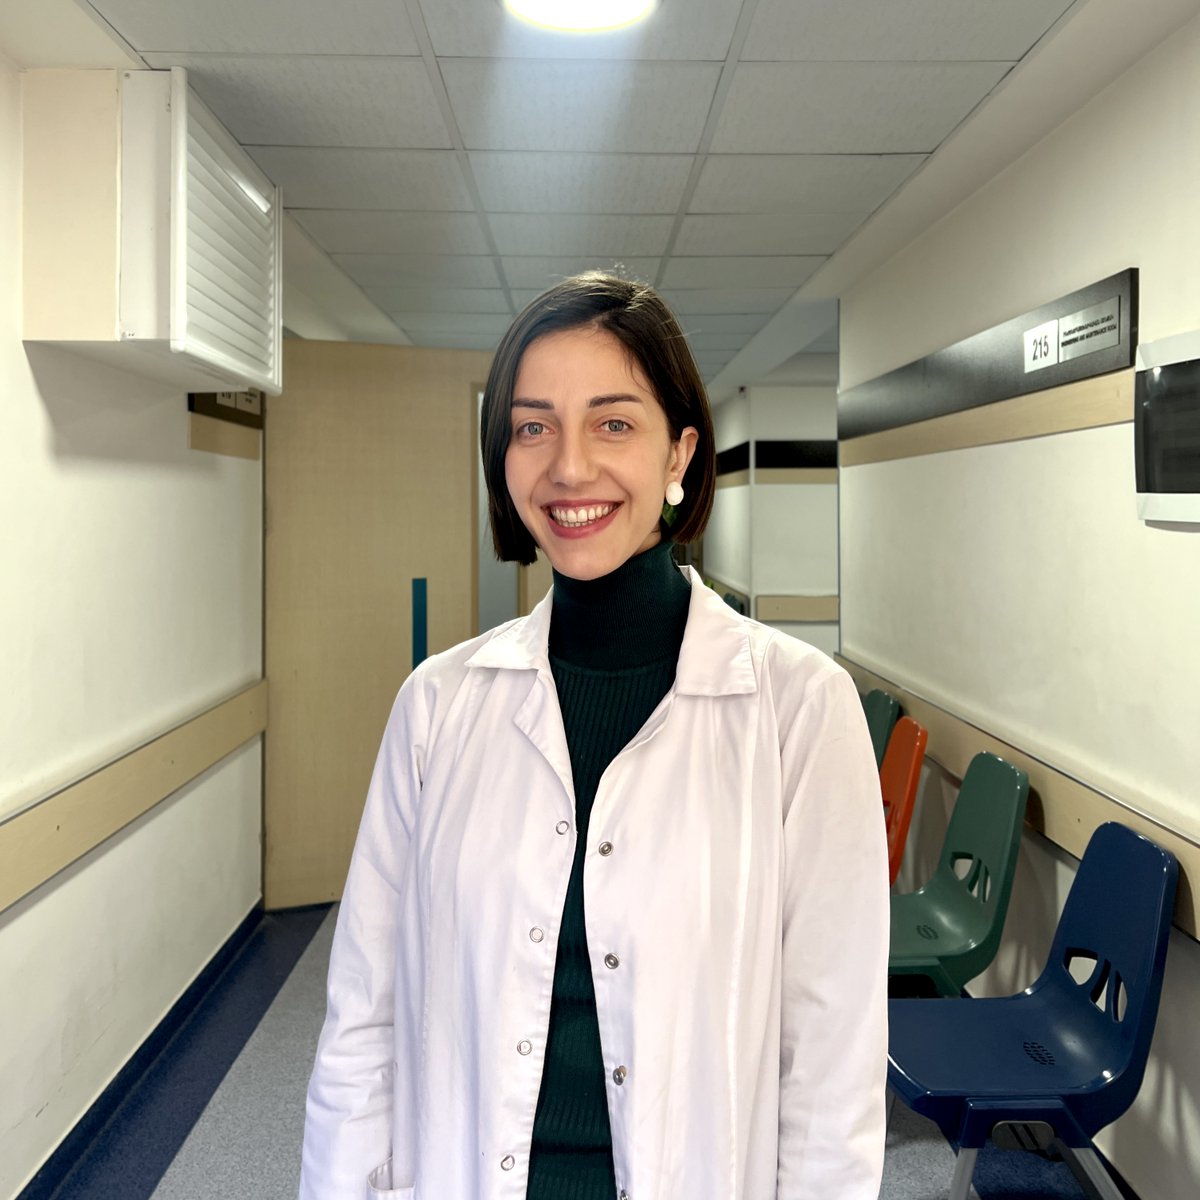 Meet our #fellows 🧐 Introducing our new fellow, Lusine Harutyunyan, MD, a hematologist-oncologist at the Yeolyan Hematology and Oncology Center. #ourteam #immonc #fellowship #research #oncology #immunooncology